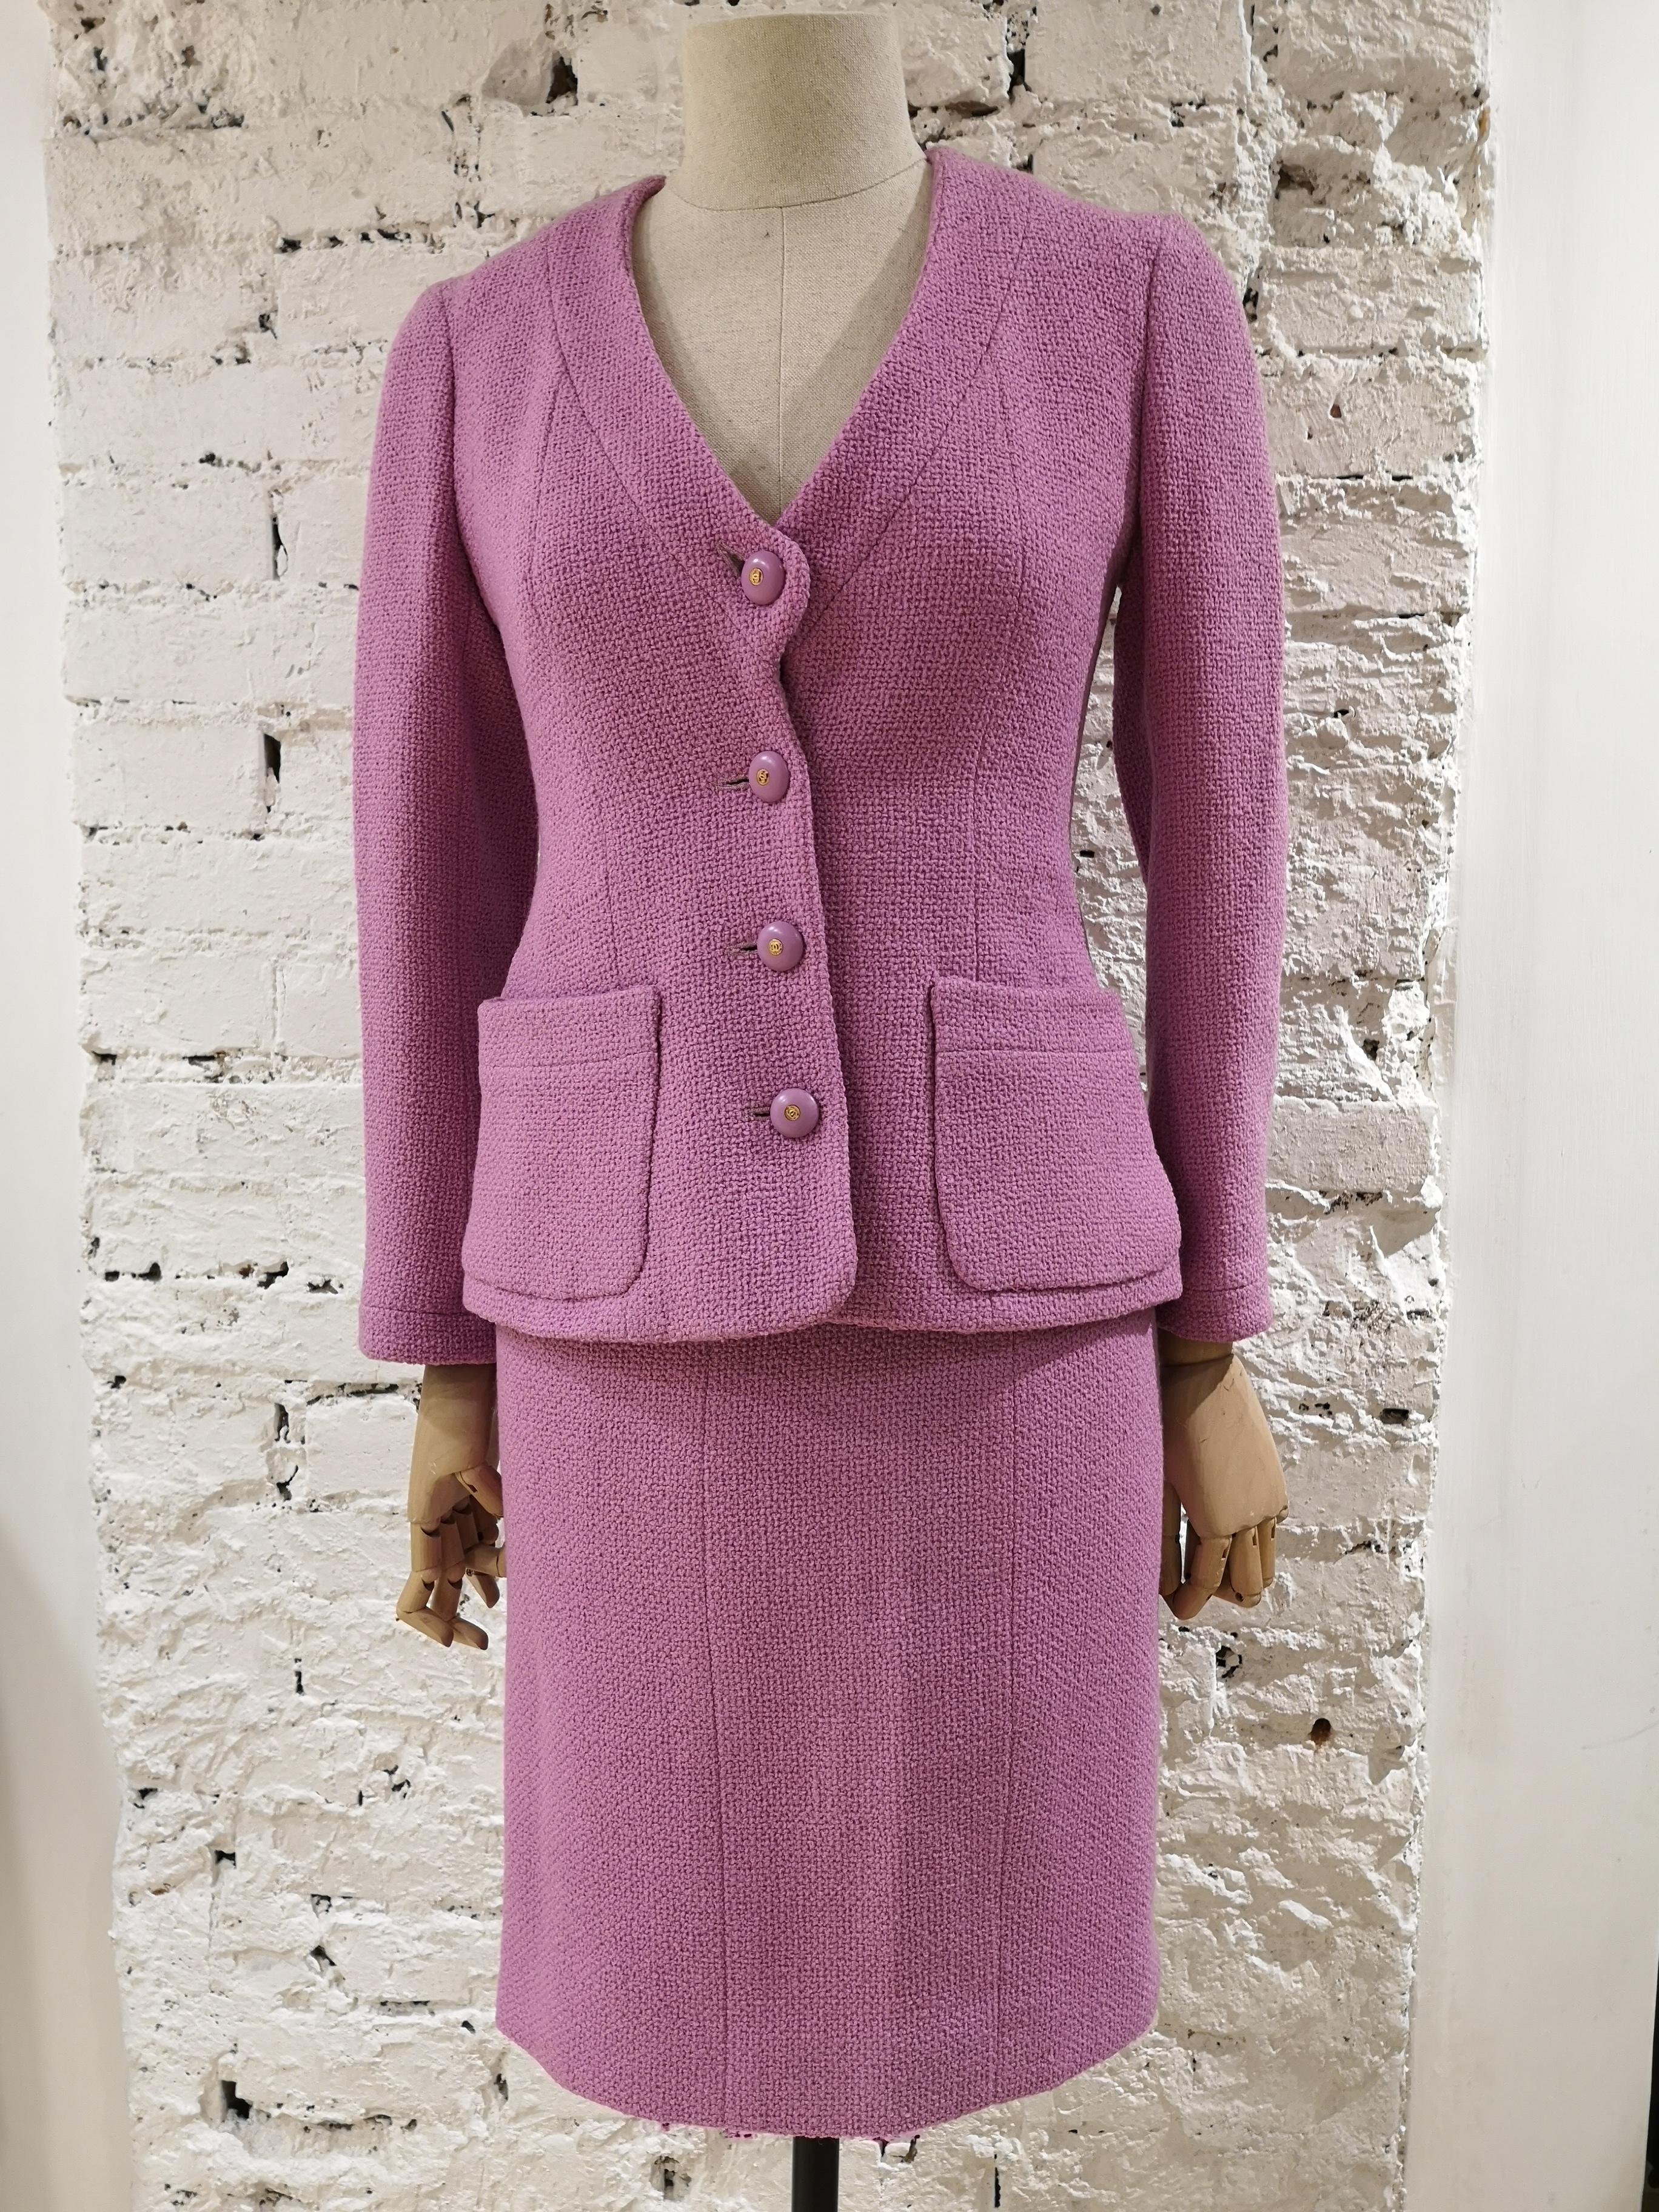 Chanel wisteria Wool Skirt Suit
Chanel wisteria skirt suit embellished with wisteria cc gold tone logo bottons 
totally made in france in size 38
